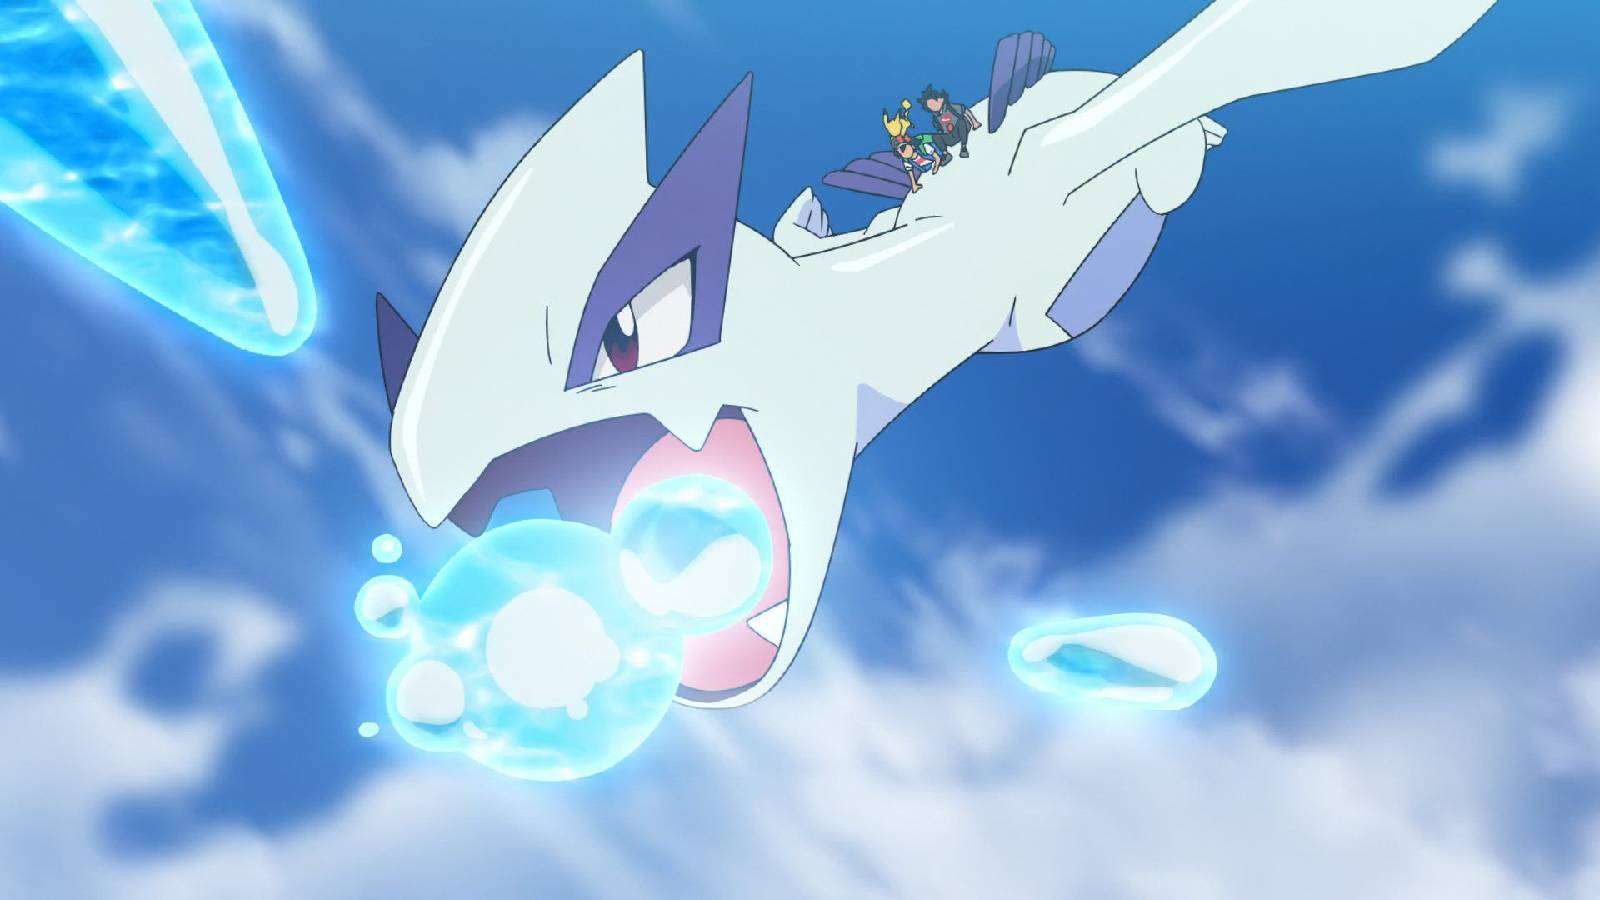 A still from the Pokemon anime shows several Pokemon trainers riding the Pokemon Lugia through the air